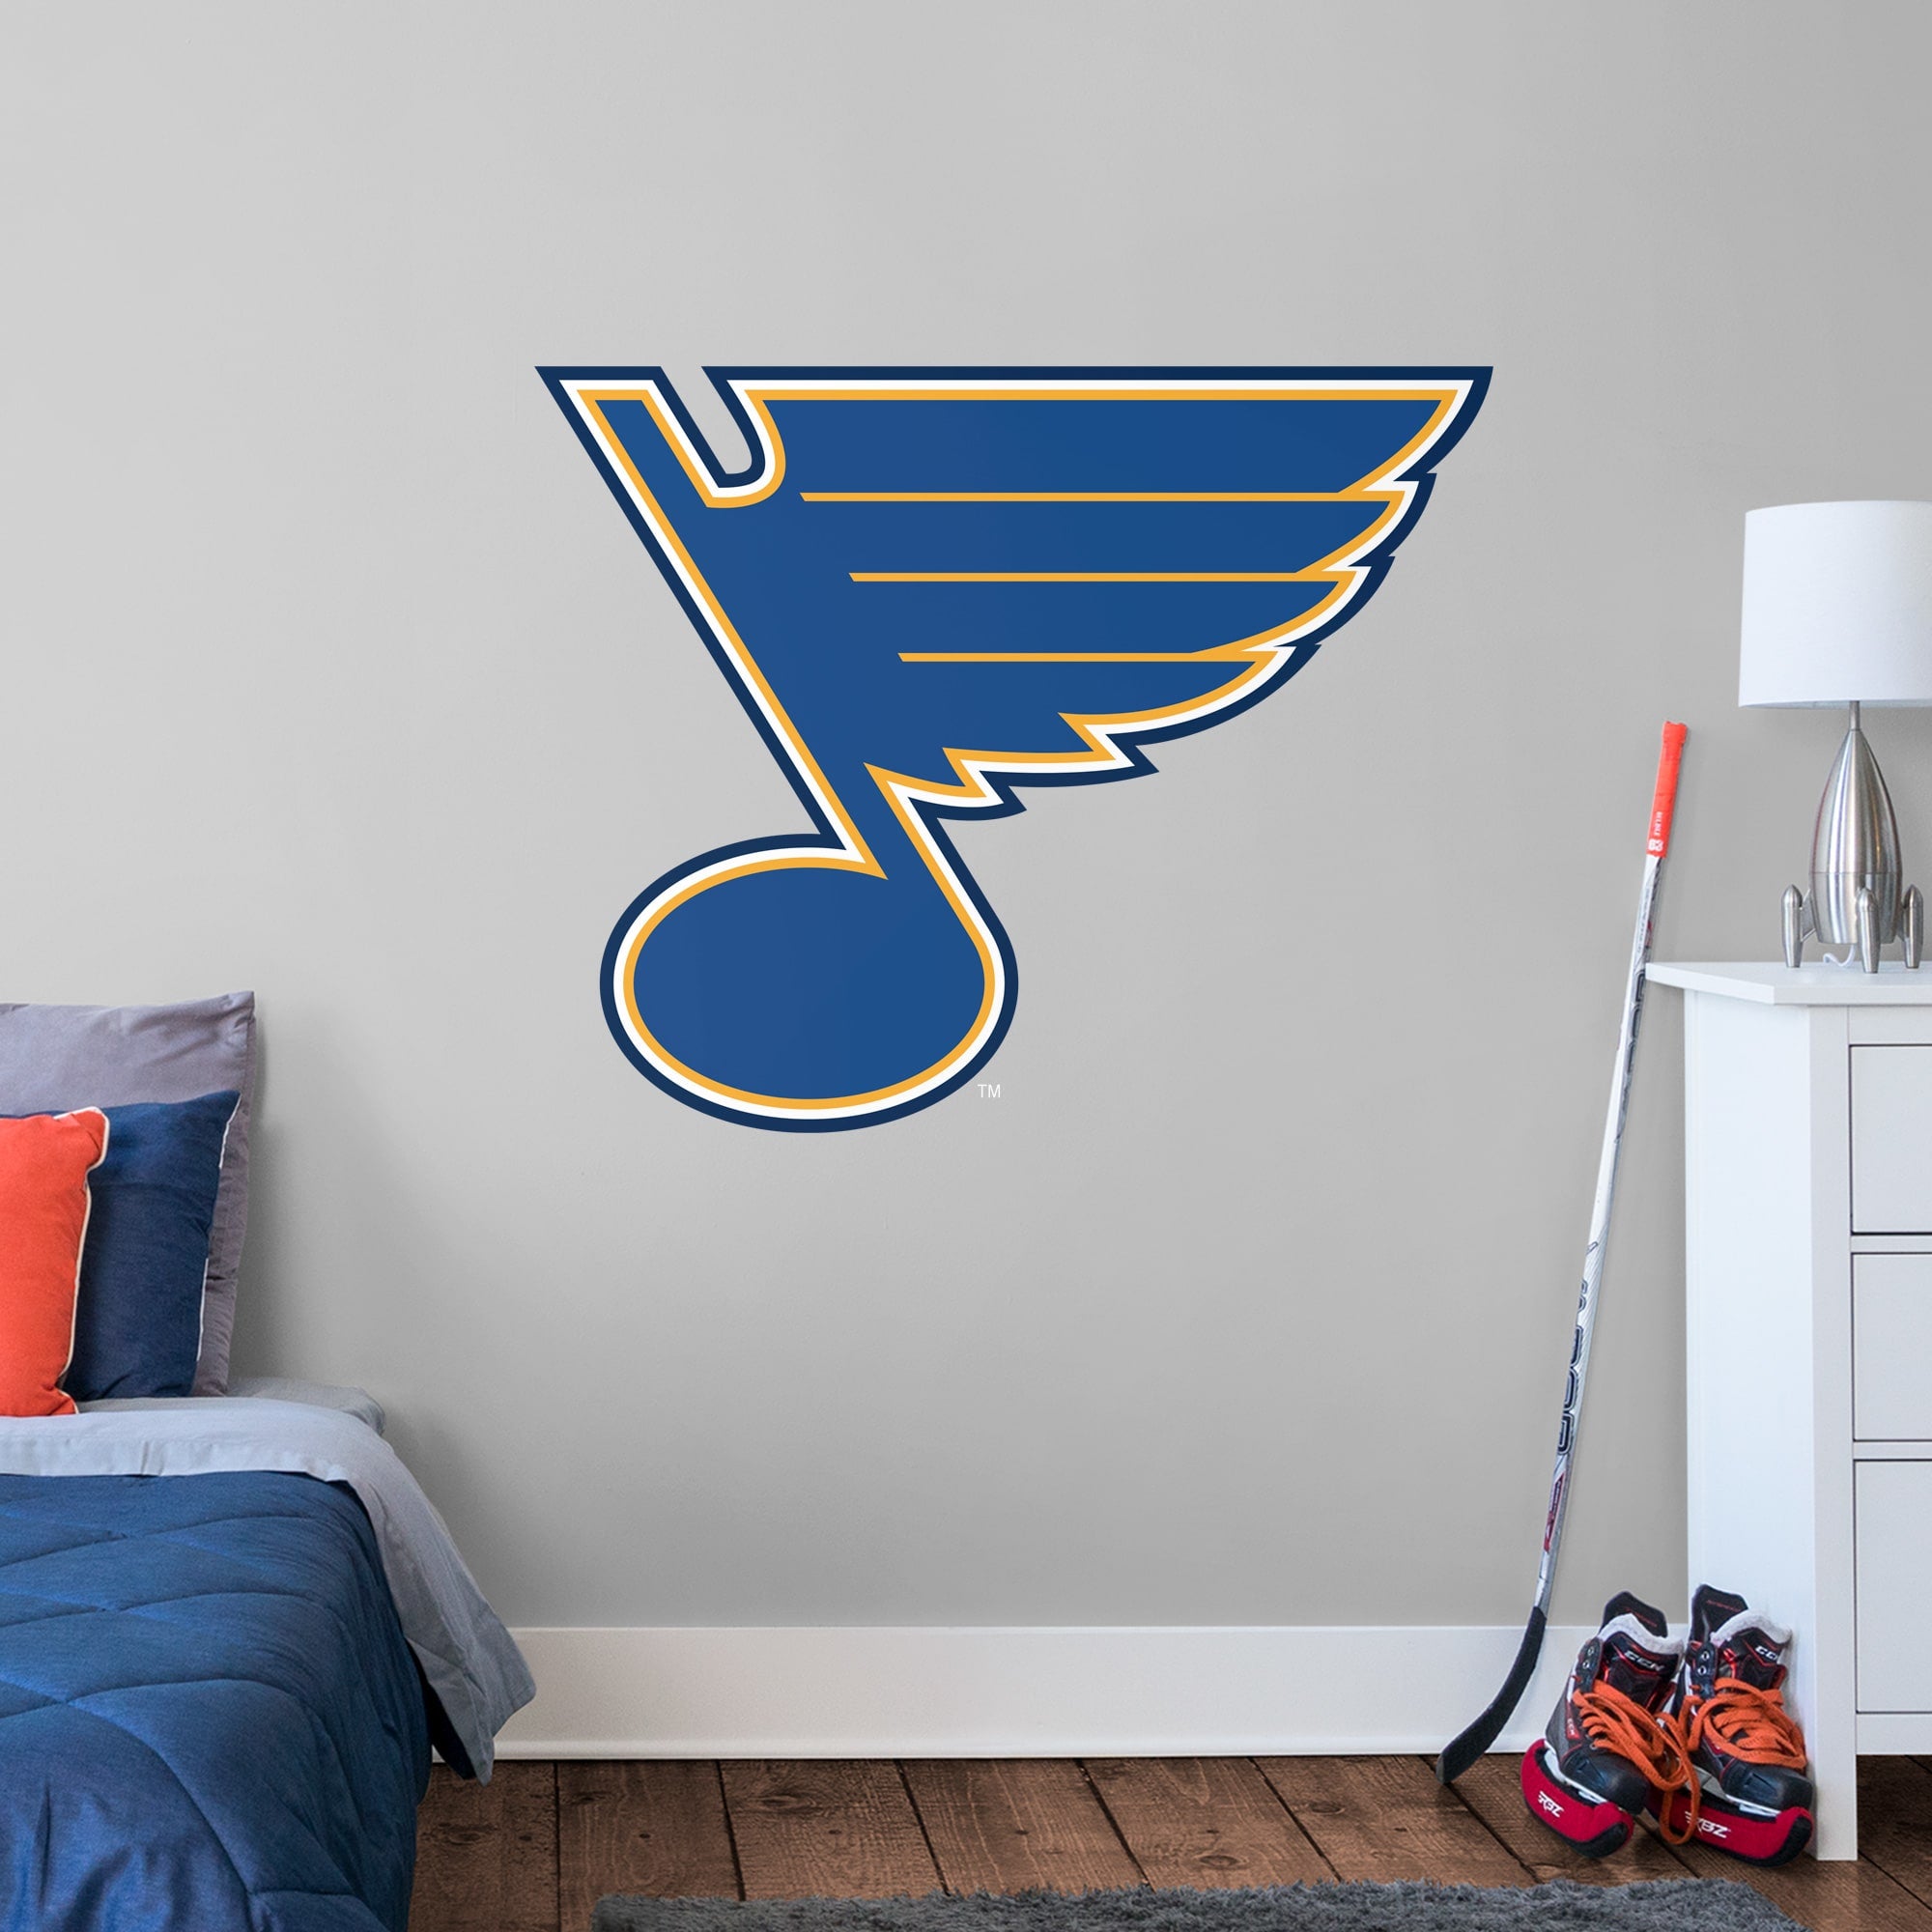 St. Louis Blues: Logo - Officially Licensed NHL Removable Wall Decal Giant Logo (48"W x 38"H) by Fathead | Vinyl